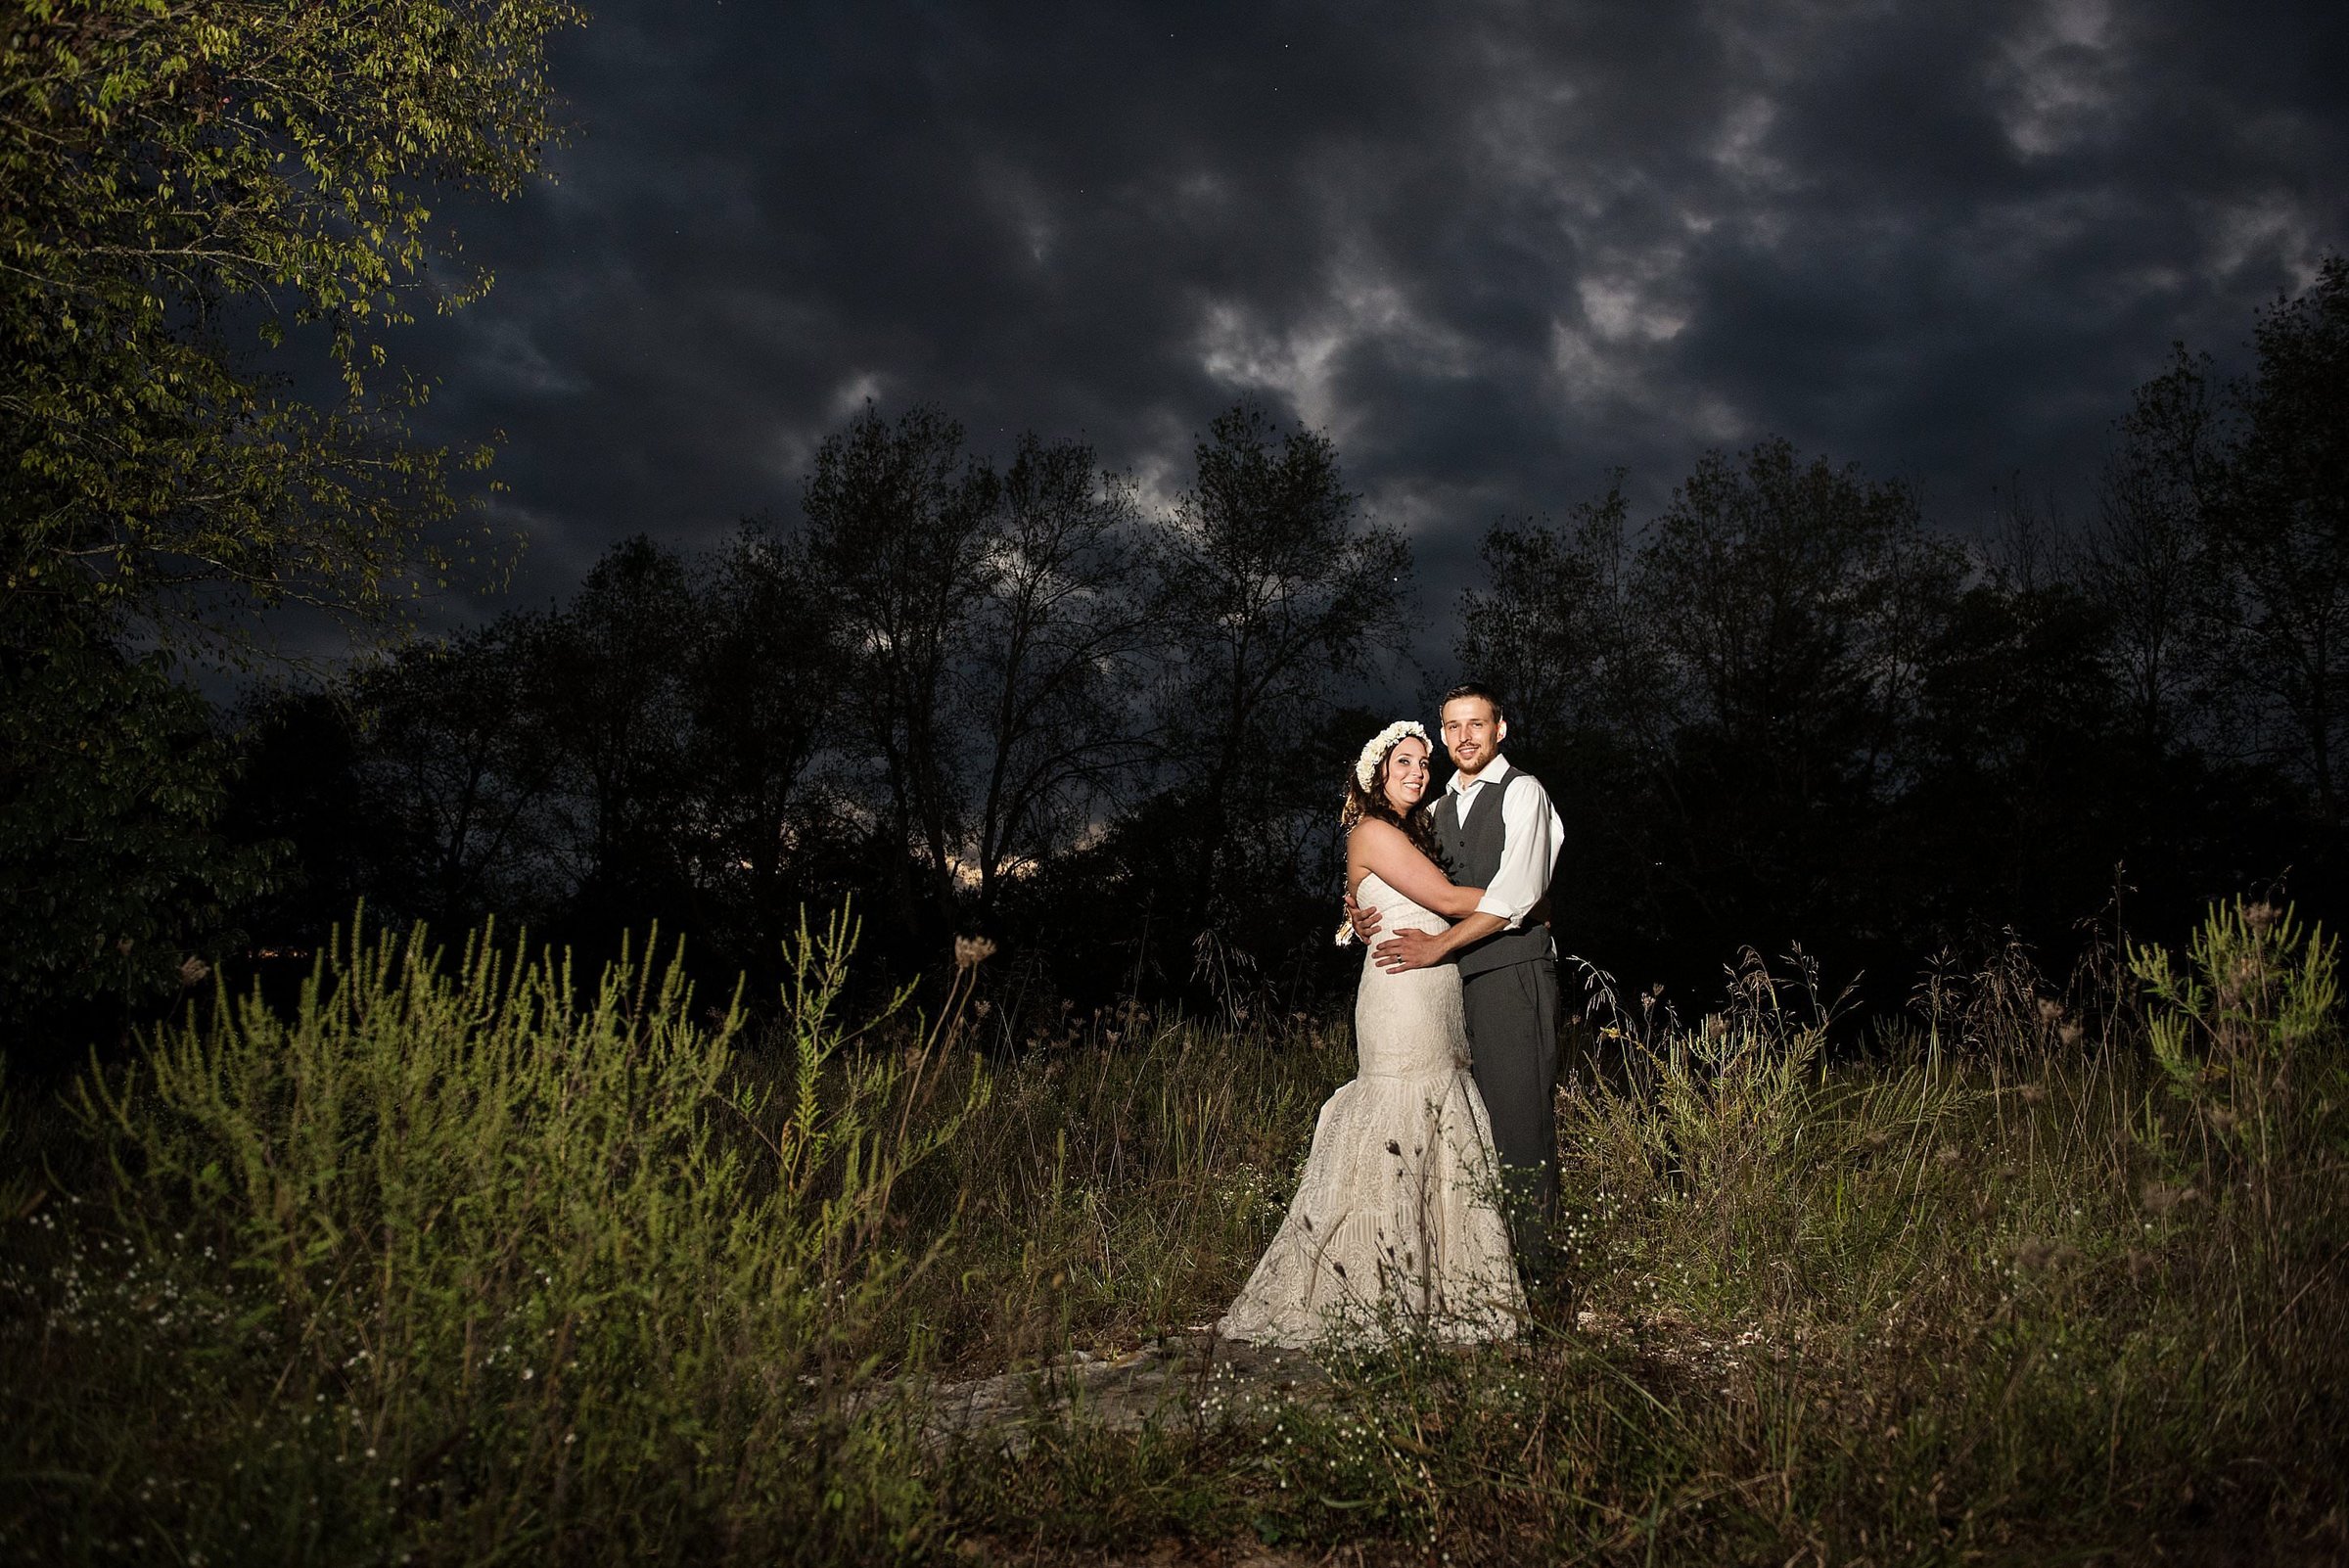 Bride and groom night time portrait under a stormy sunset